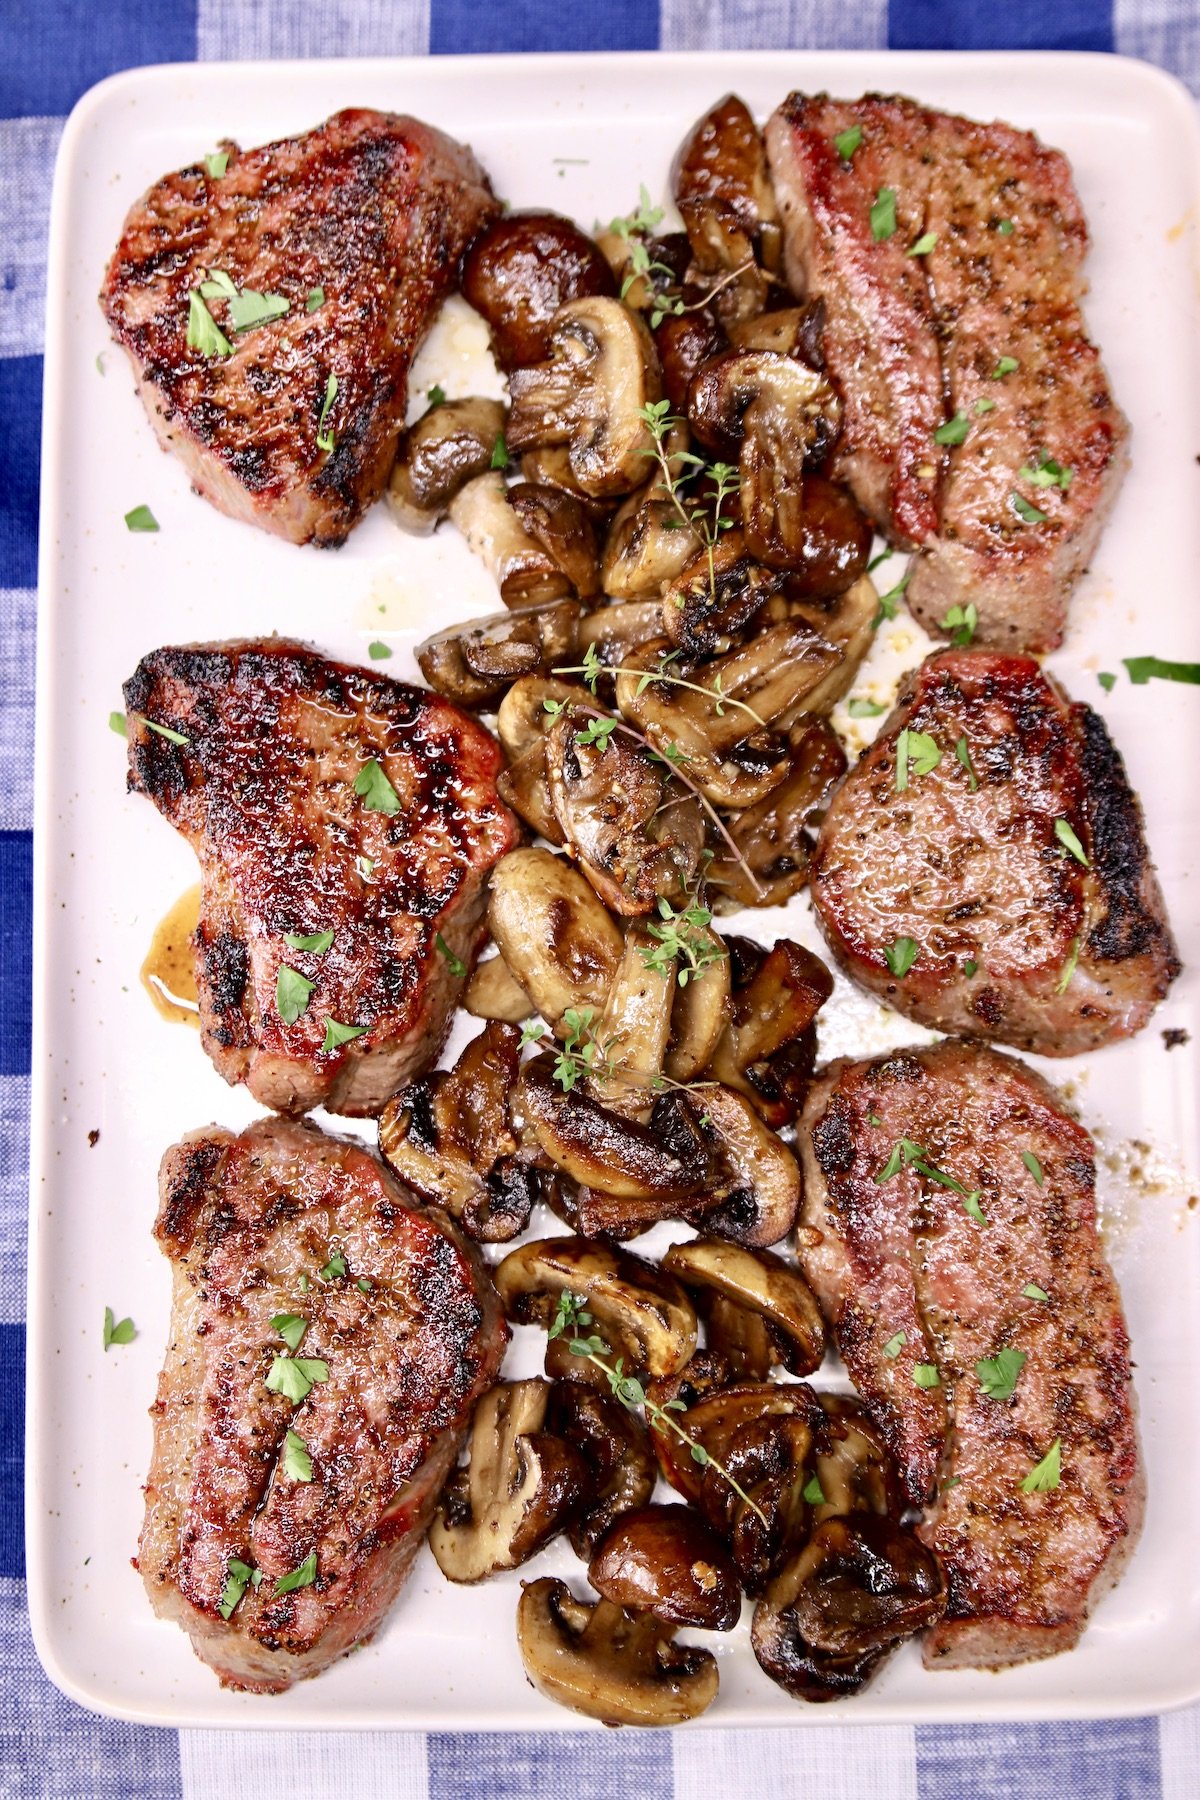 platter of grilled steaks with mushrooms